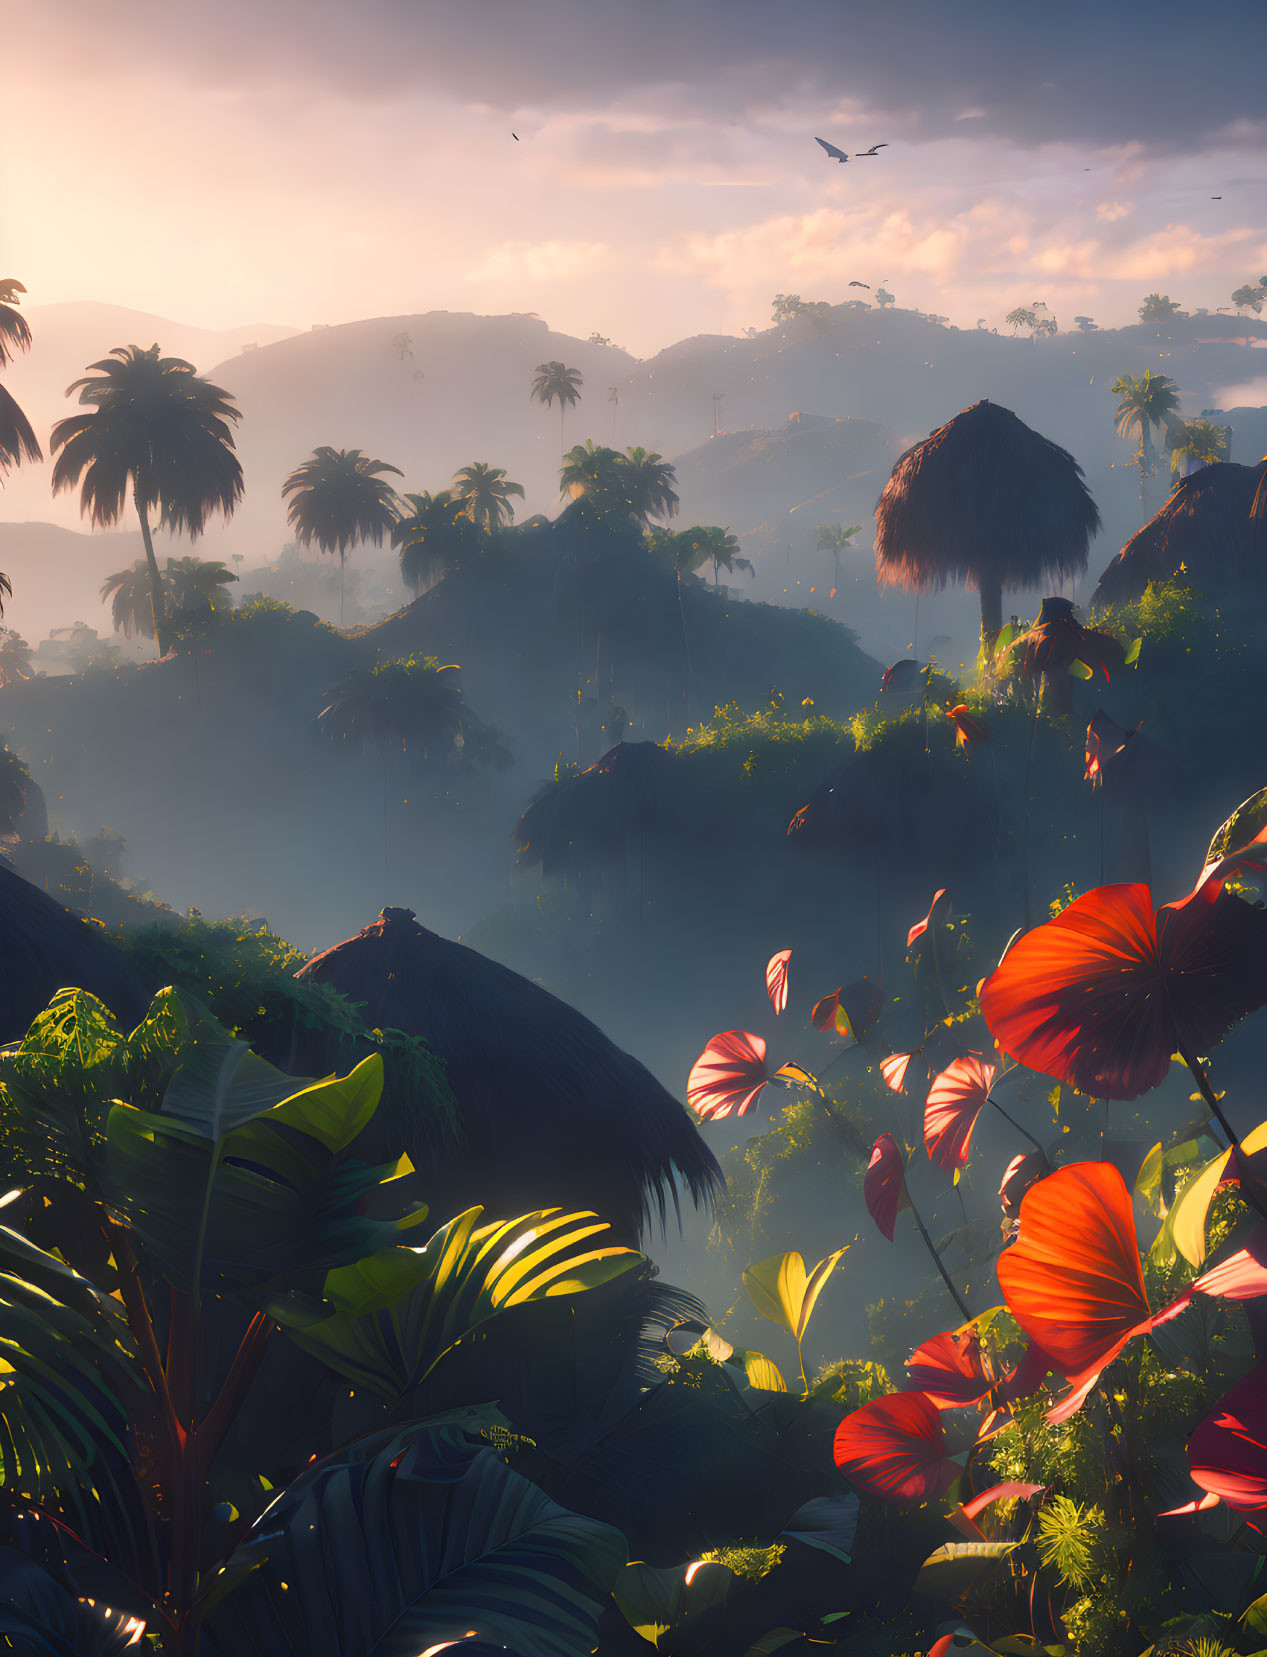 Tropical landscape with vibrant foliage, thatched huts, misty hills, and birds in sunrise